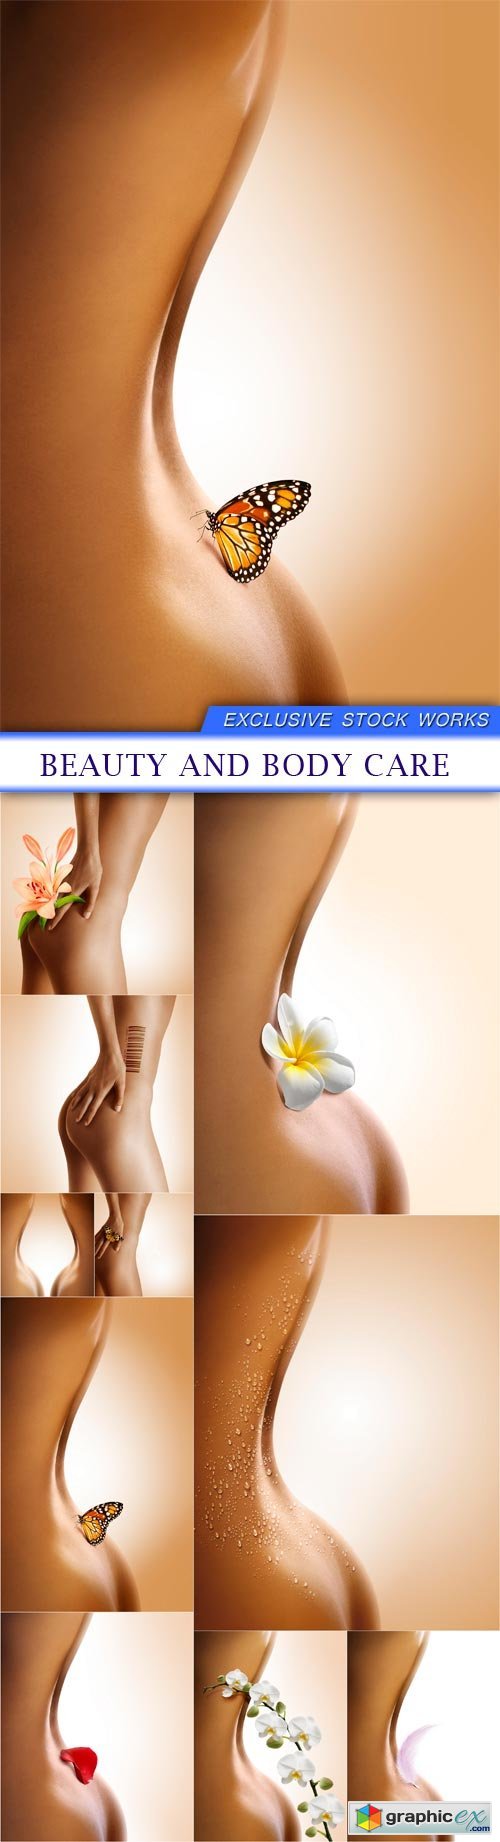 Beauty and Body Care 10X JPEG